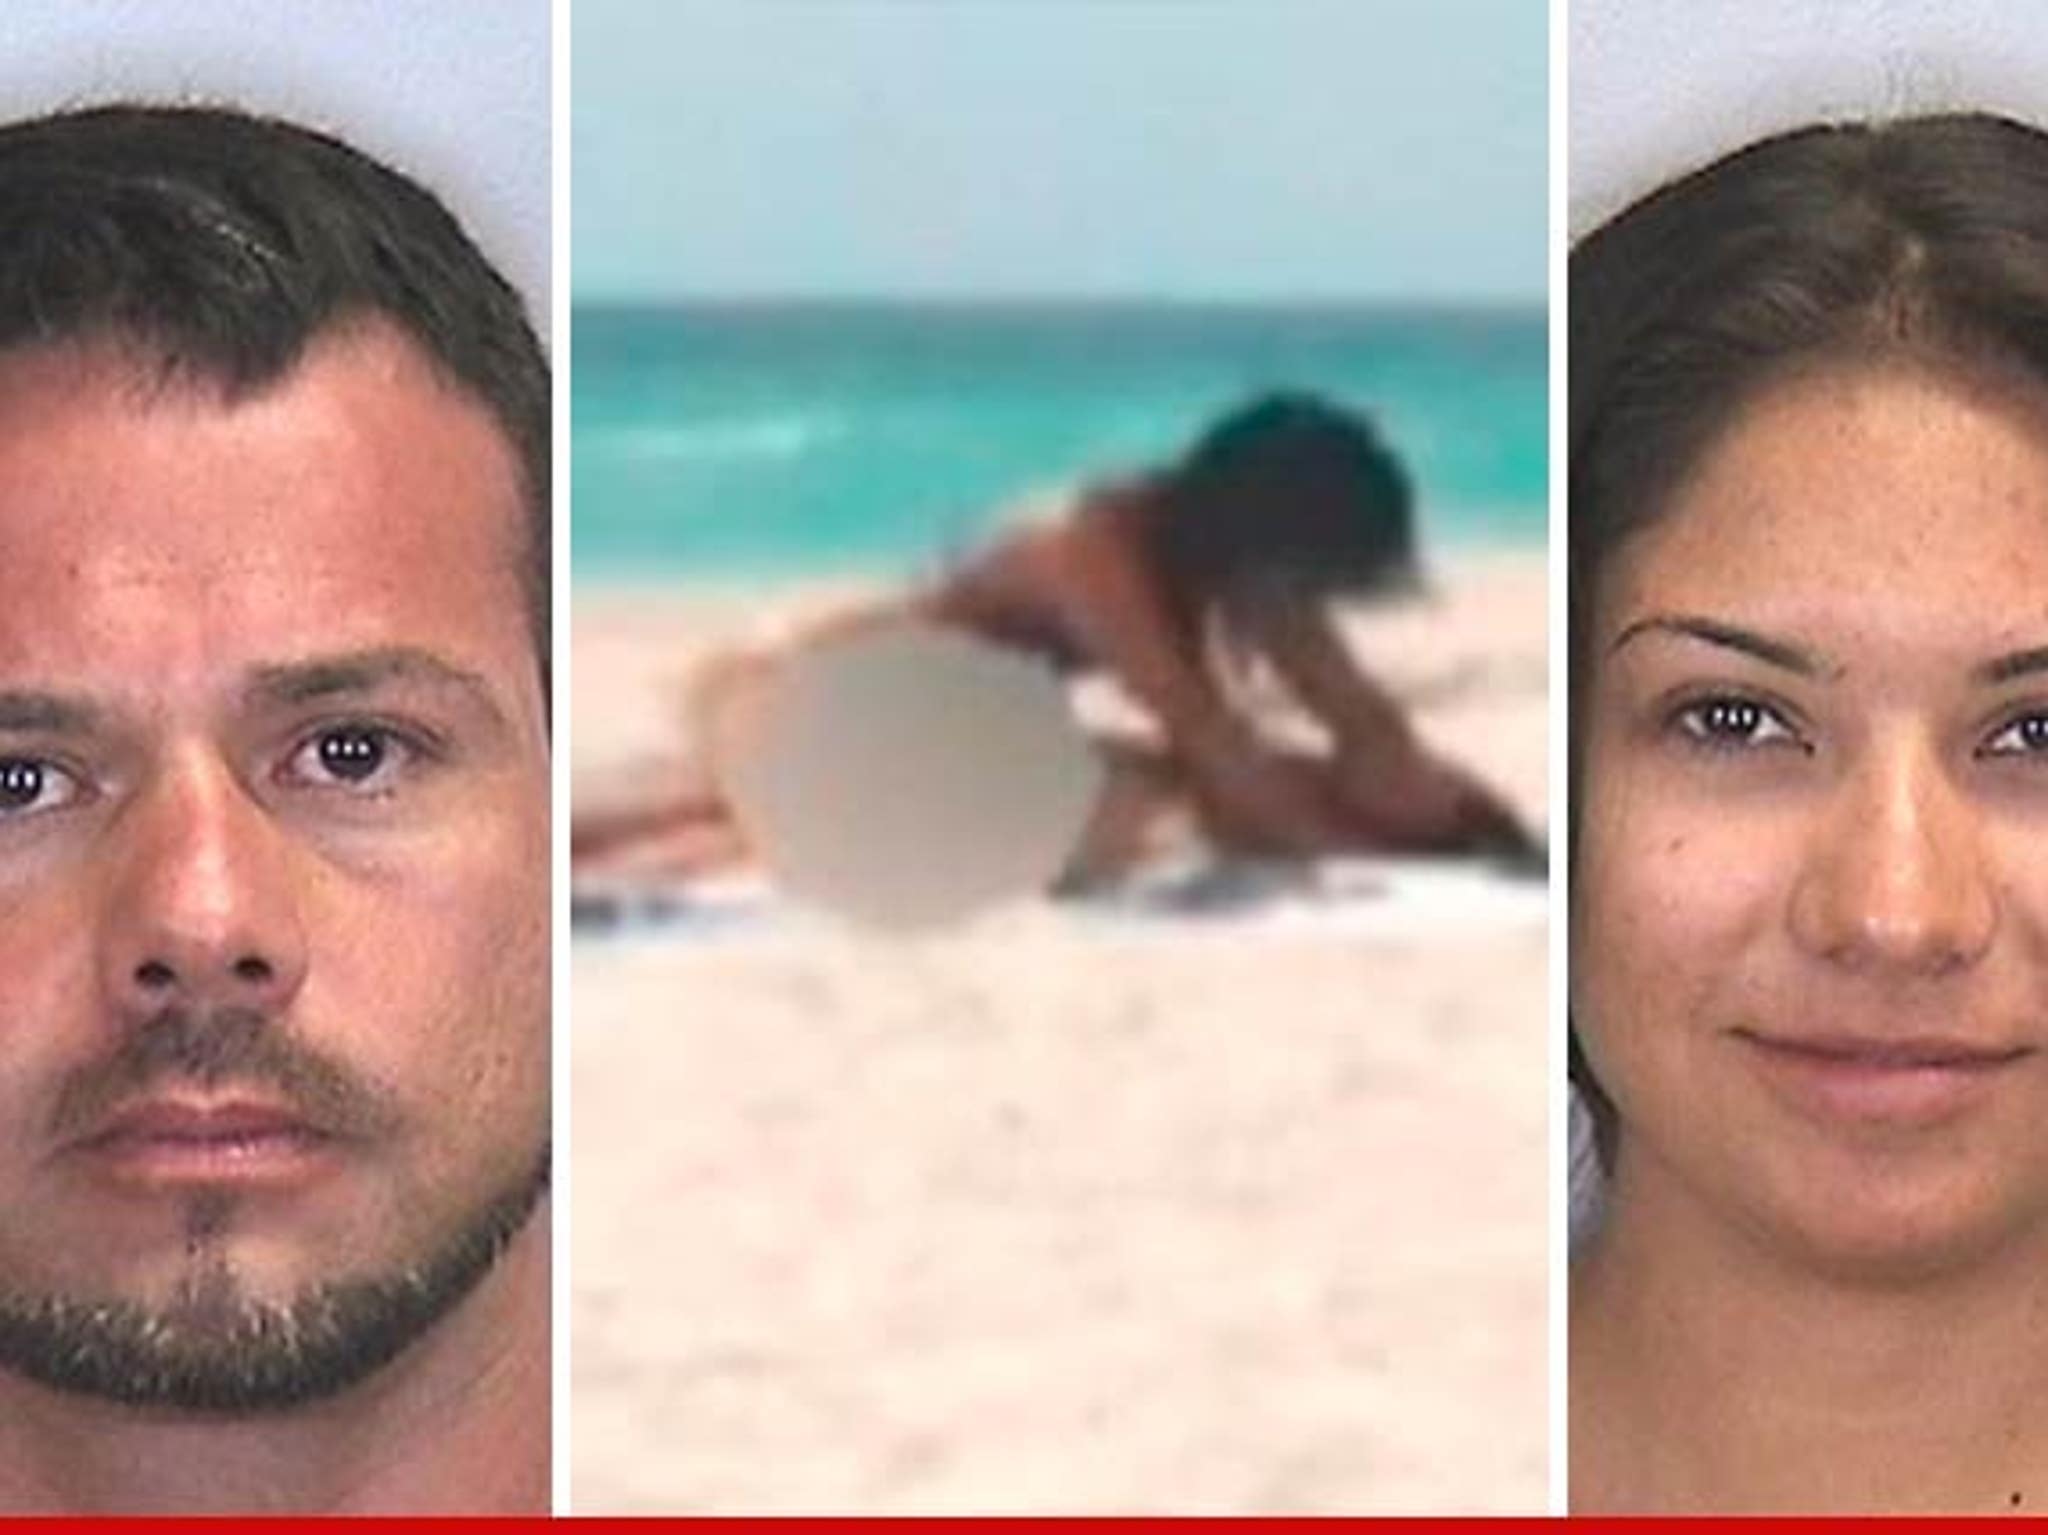 Sex On the Beach Lands Guy In Prison for 2 Years